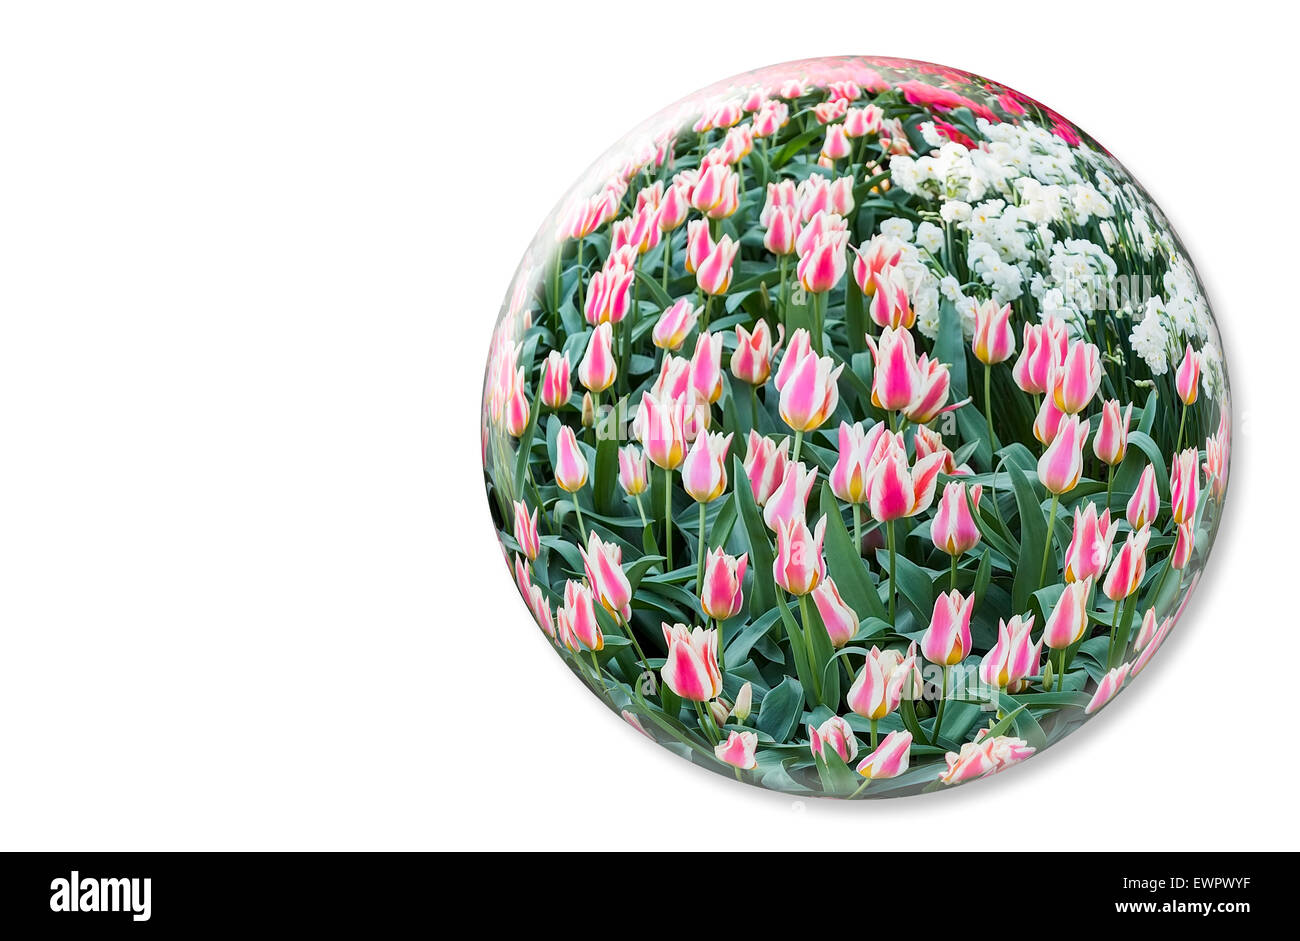 Crystal ball with red white tulips in Keukenhof Holland on white background Stock Photo